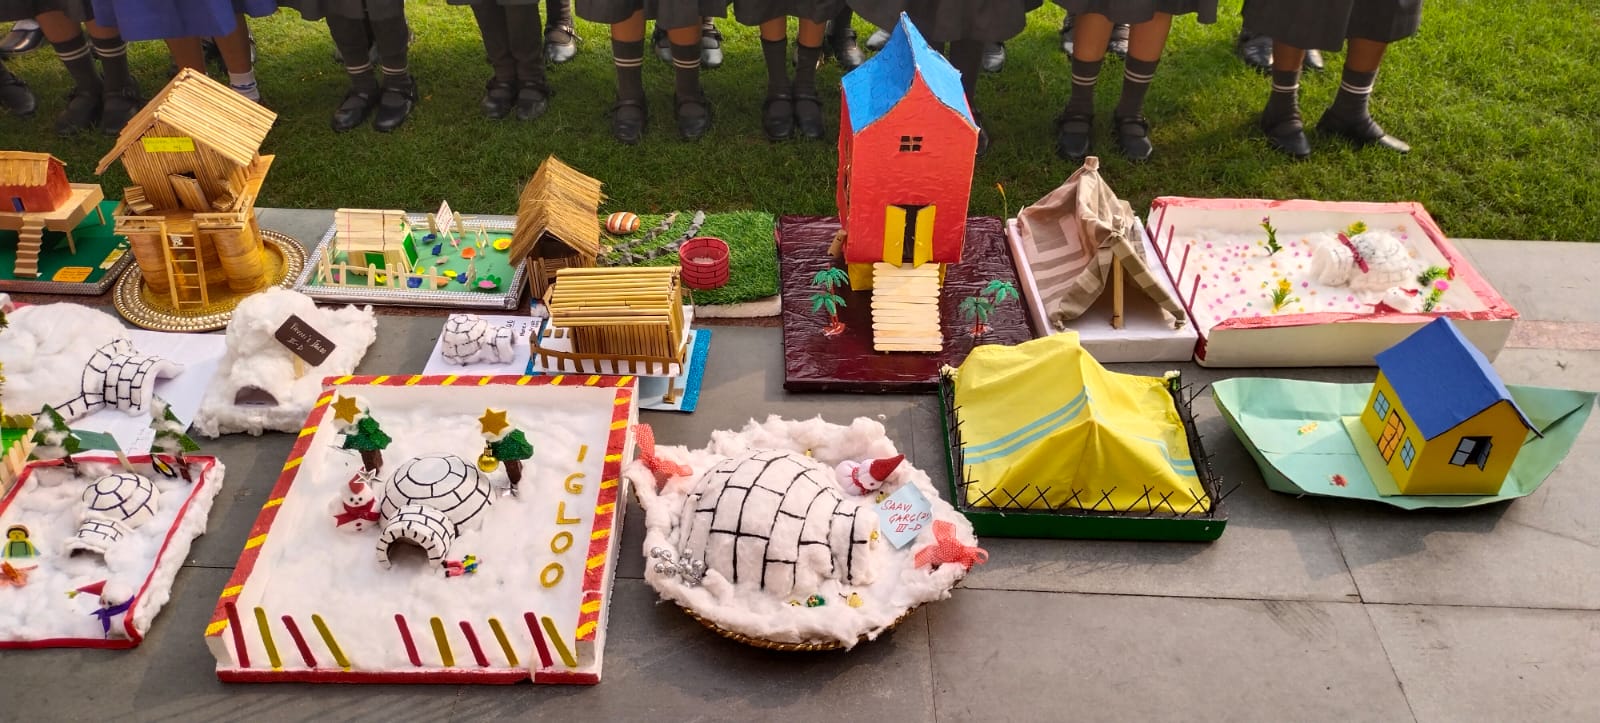 Model of the unusual houses